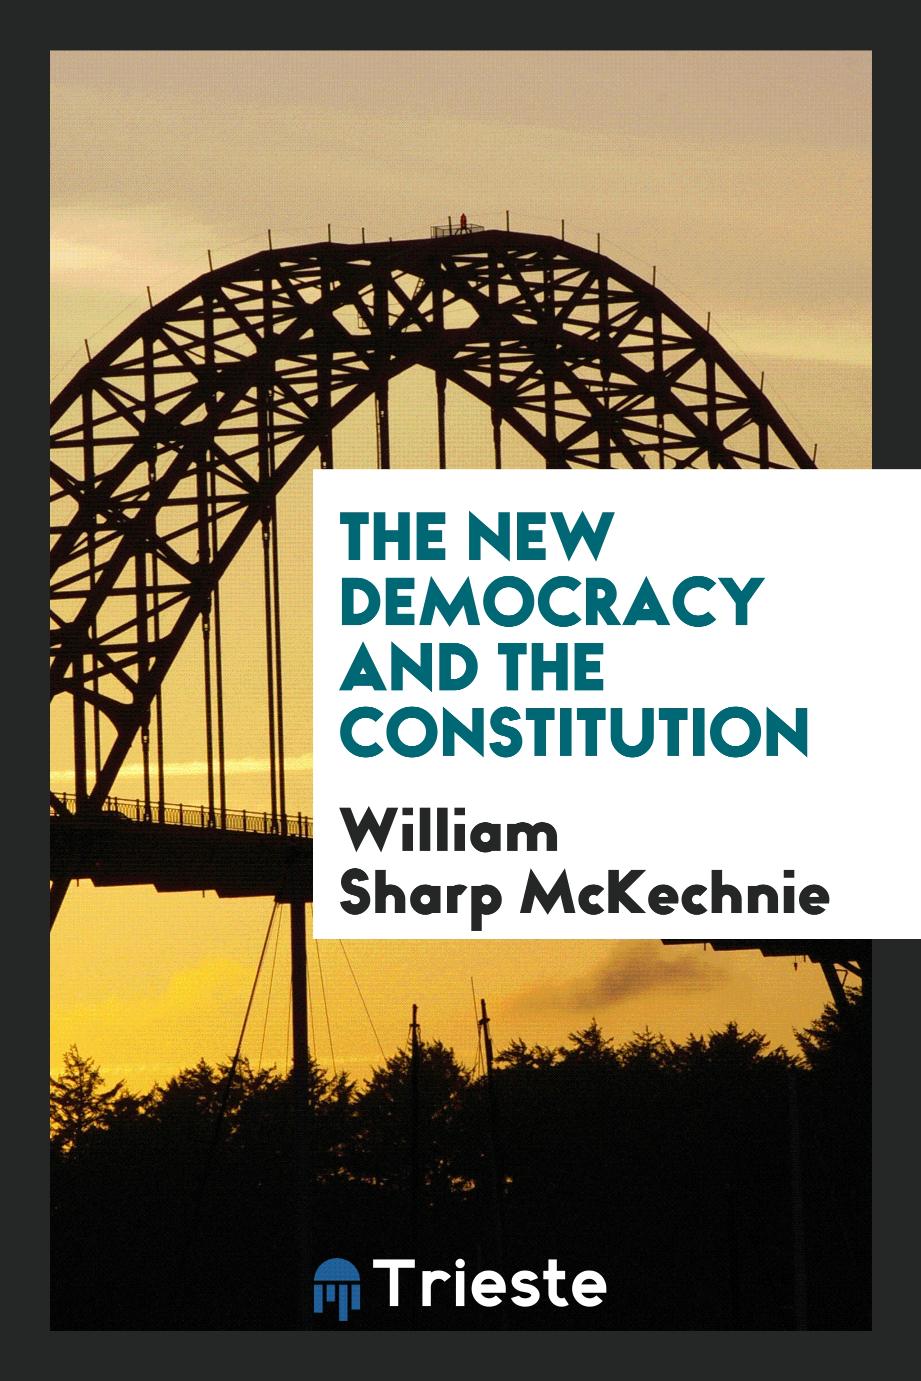 The new democracy and the Constitution